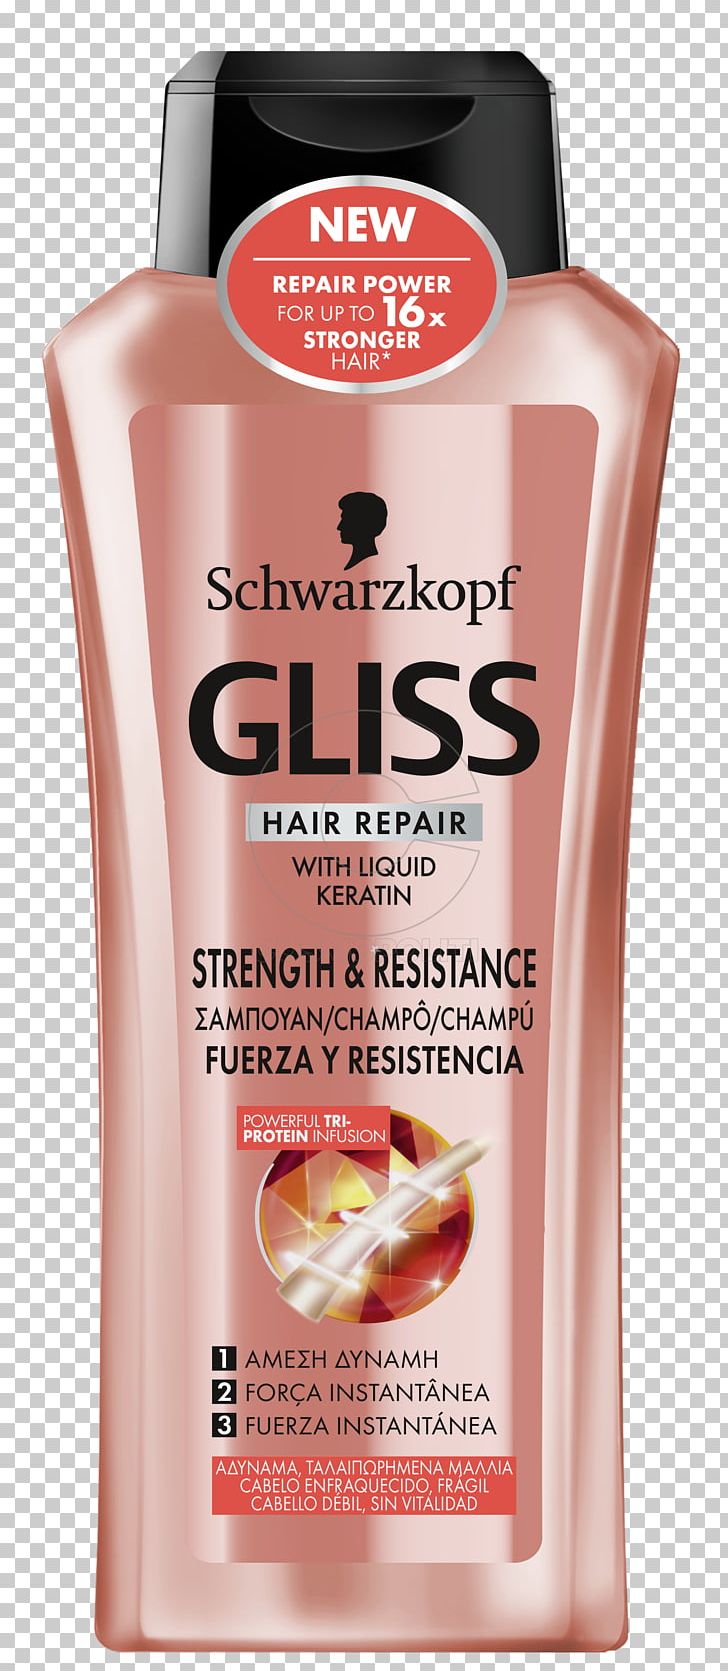 Lotion Schwarzkopf Gliss Ultimate Repair Shampoo Schwarzkopf Gliss Ultimate Repair Shampoo Hair PNG, Clipart, Capelli, Hair, Hair Care, Liquid, Lotion Free PNG Download